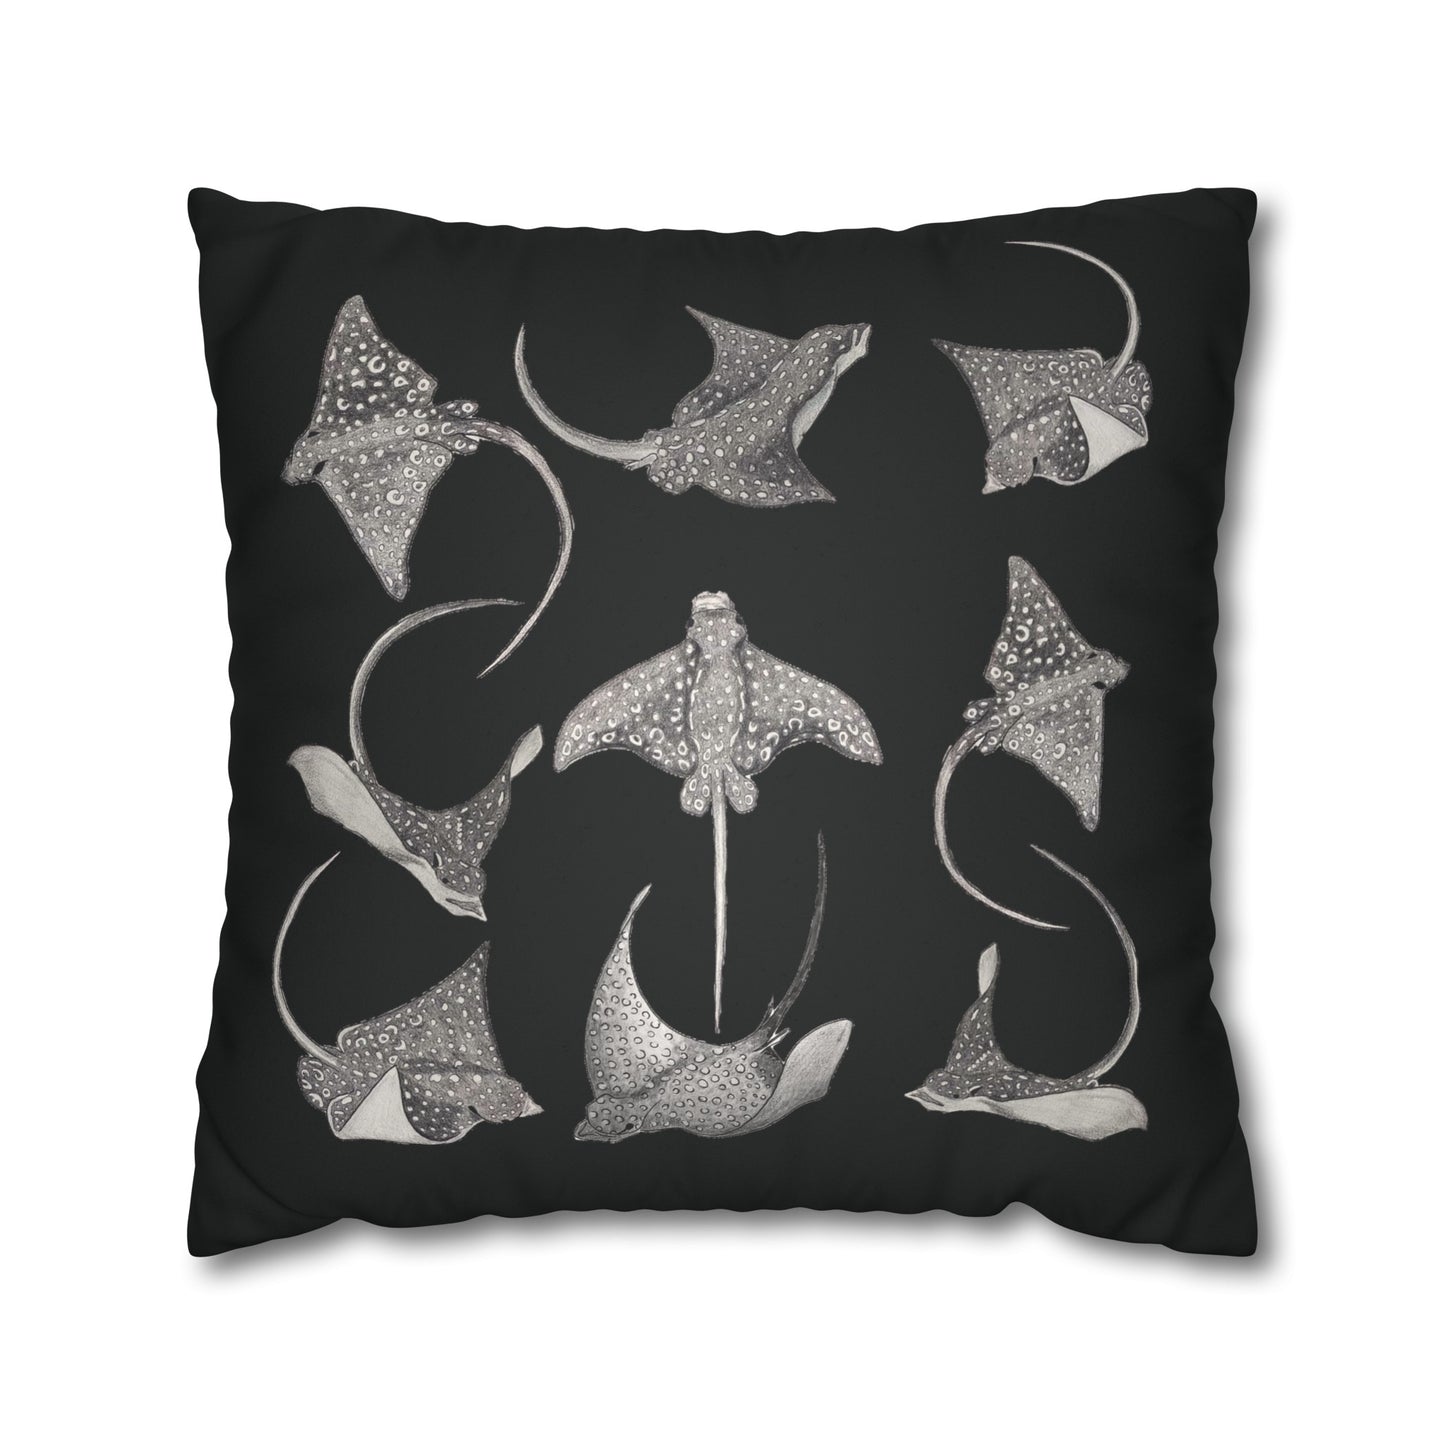 Eagle Ray - Faux Suede Square Pillow Case - Black